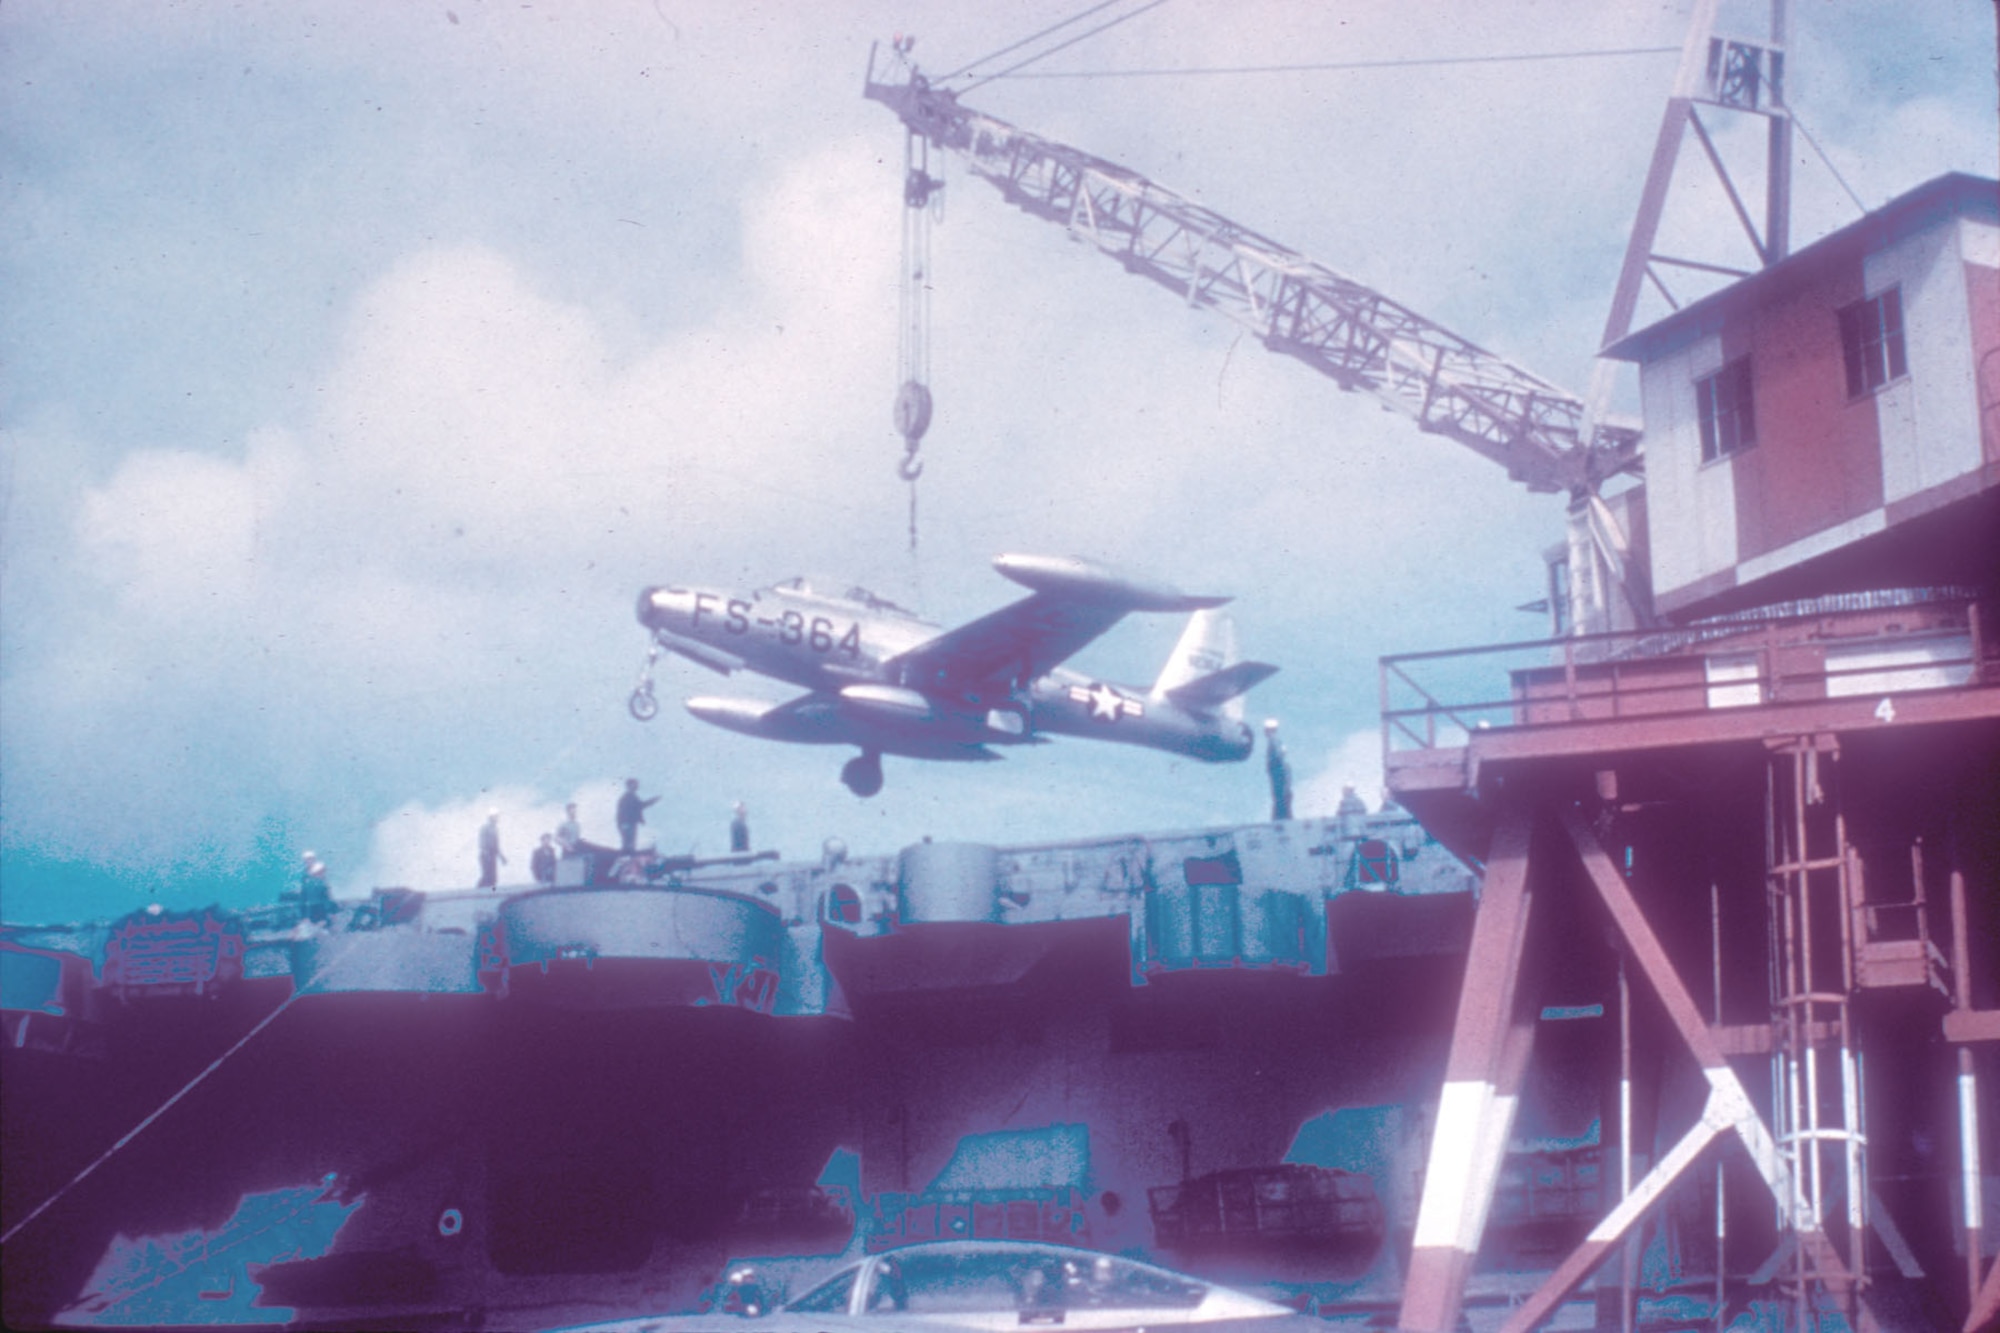 In November 1950 the Air Force sent the highly-experienced 27th Fighter Escort Group to Korea to protect B-29 bombers from MiG-15 attacks. Pictured here are 27th FEG F-84s being loaded onto the carrier USS Bataan for shipment to Korea. (U.S. Air Force photo)